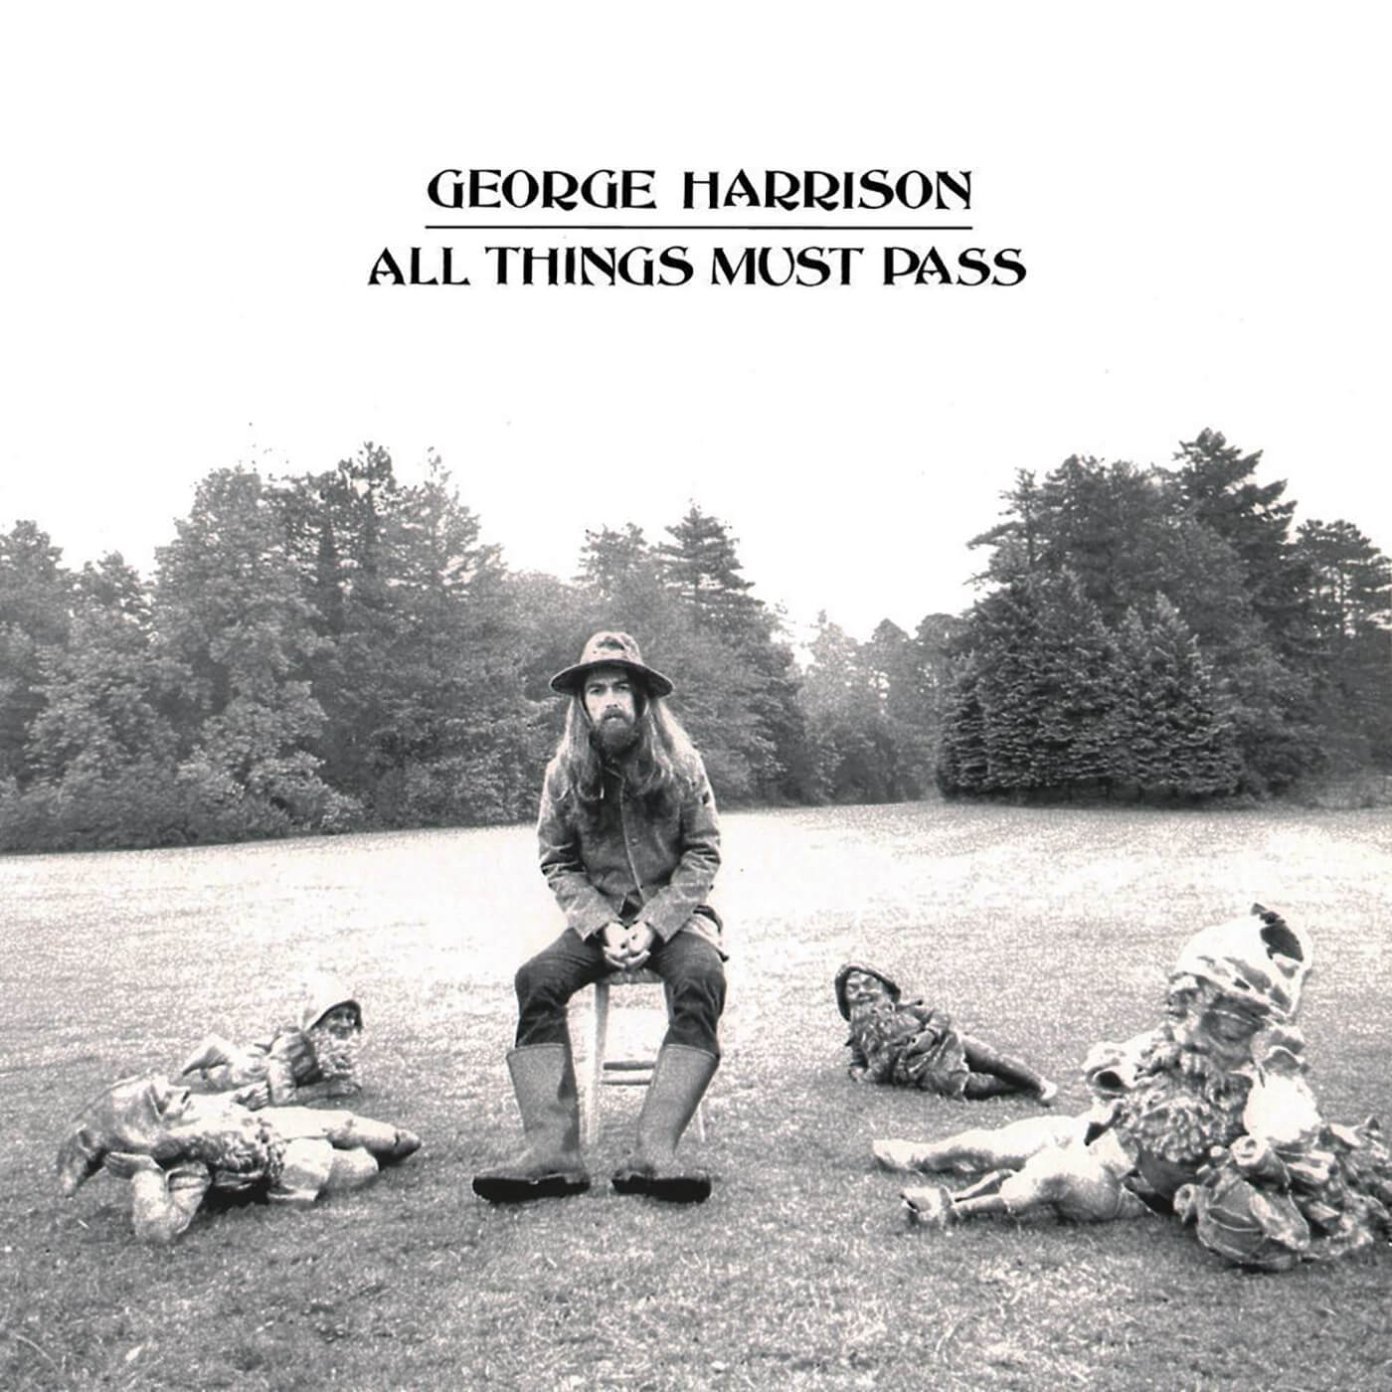 All-Things-Must-Pass-George-Harrison@1400x1400-1392x1392.jpeg